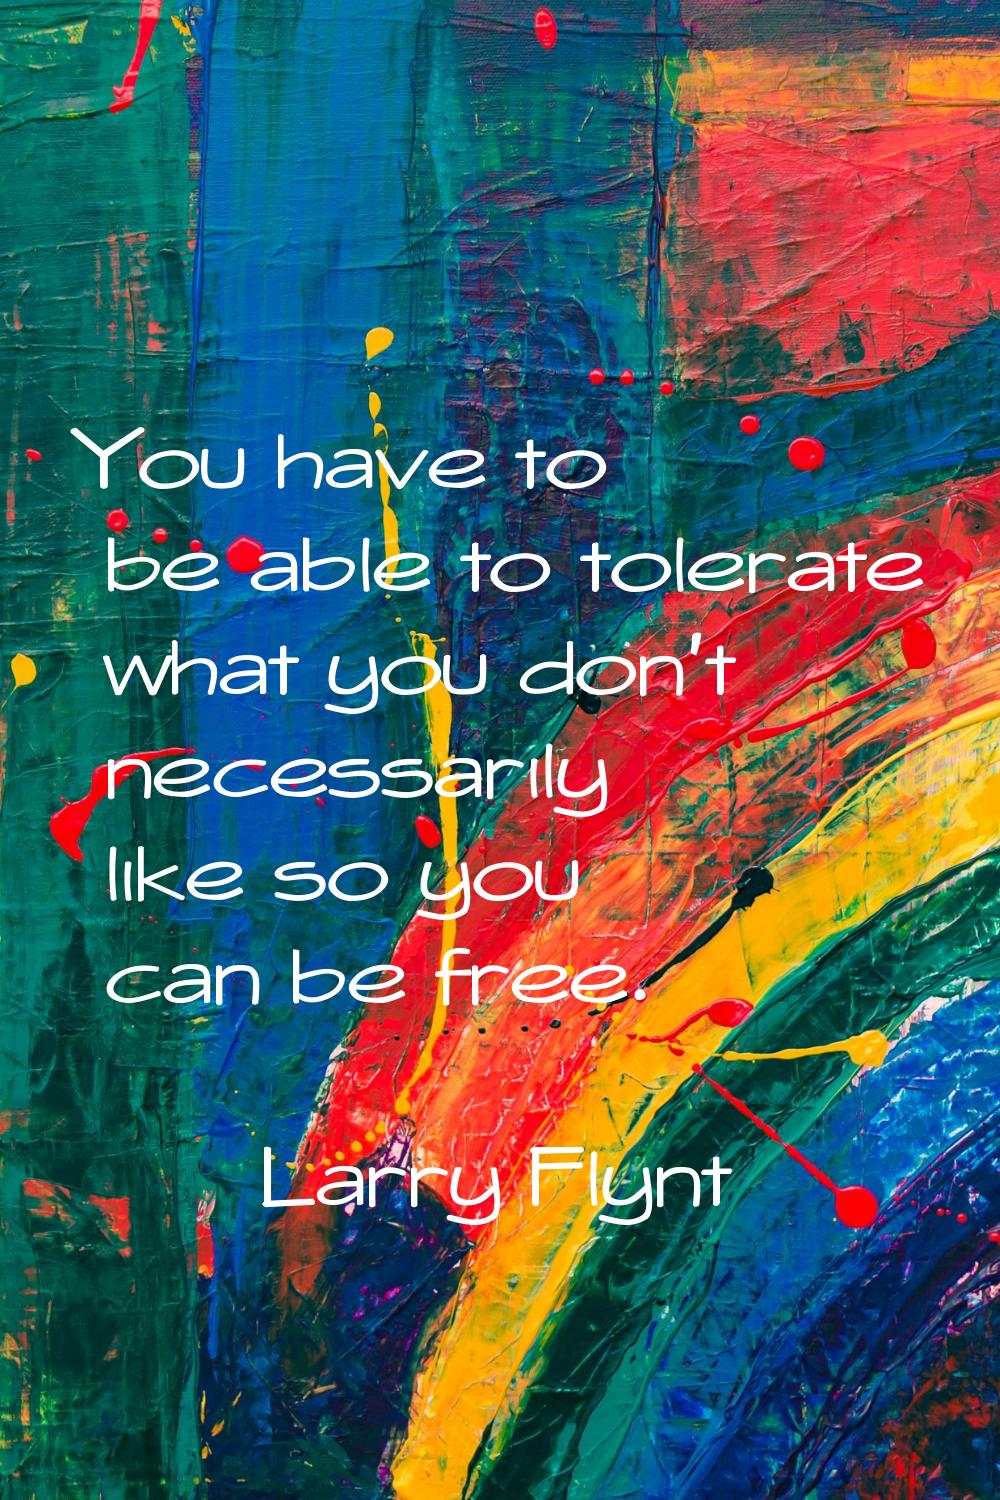 You have to be able to tolerate what you don't necessarily like so you can be free.